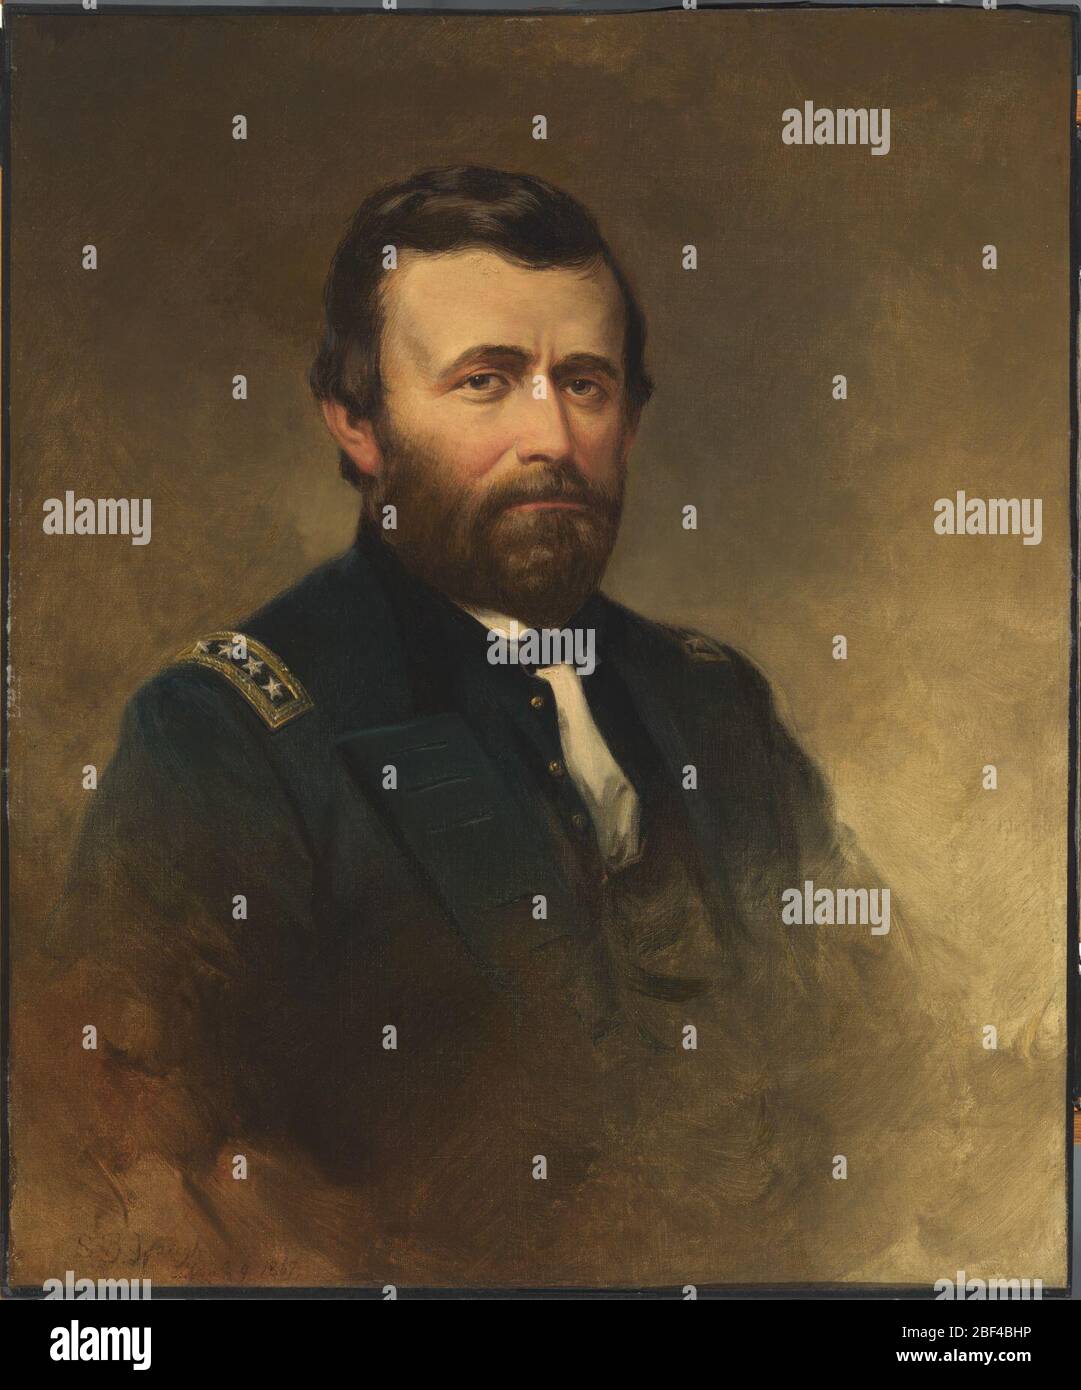 Ulysses S Grant. Born Point Pleasant, OhioArtist Samuel Bell Waugh painted this portrait of Ulysses S. Grant just days after he became the nation’s eighteenth president. Stock Photo